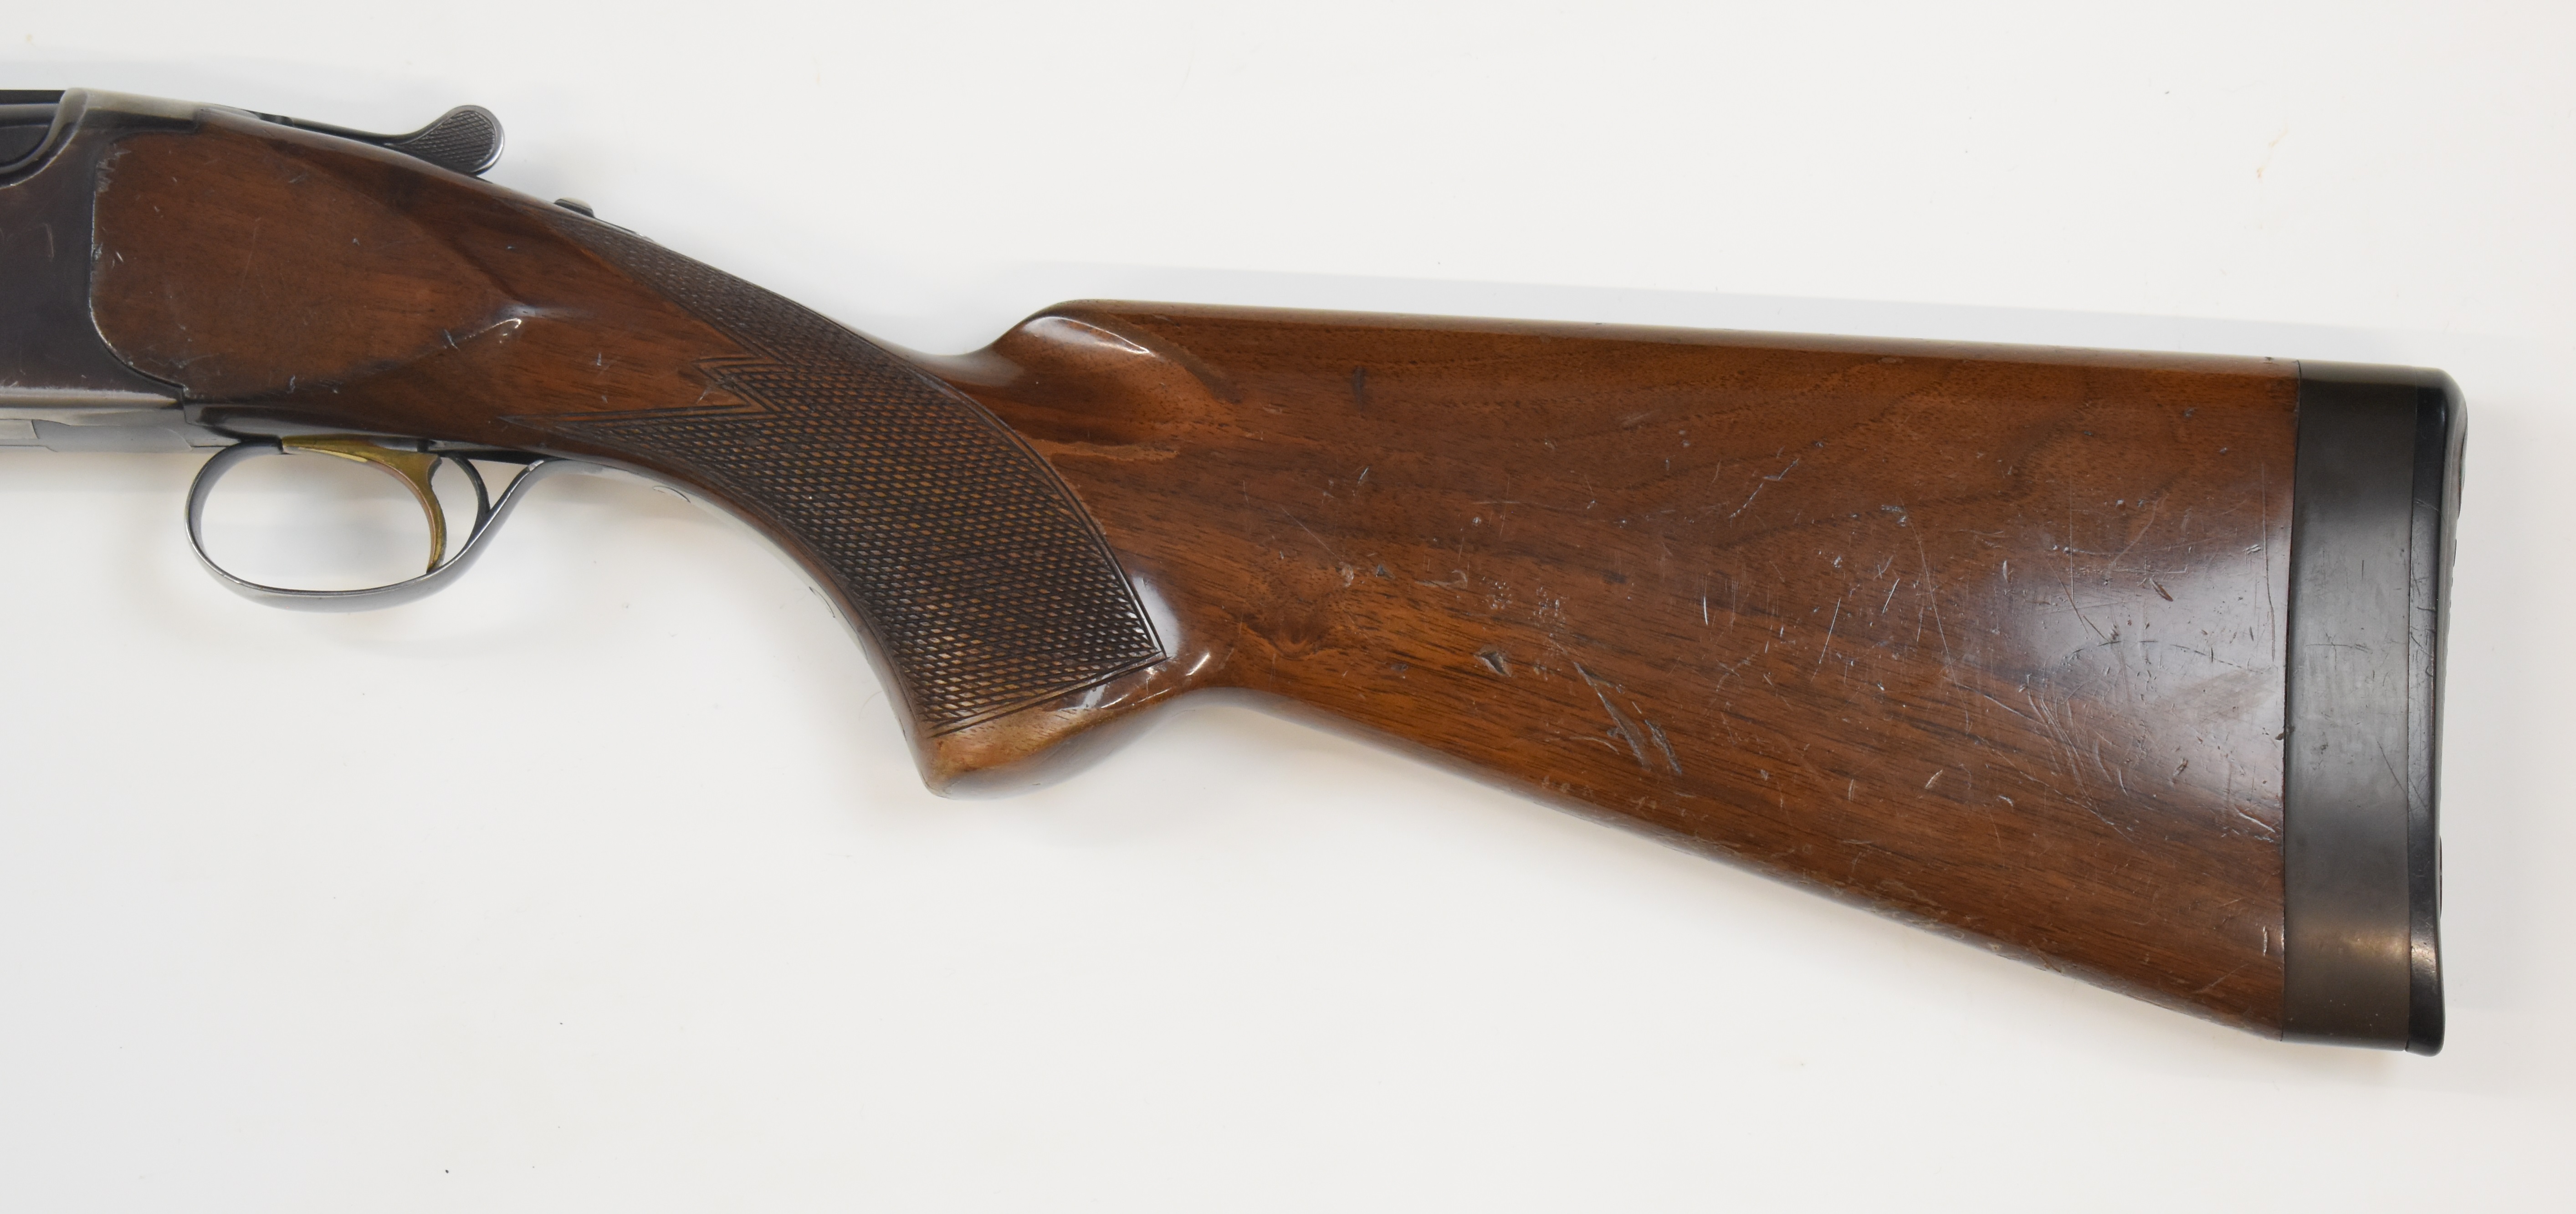 Browning Citori 12 bore over and under ejector shotgun with named underside, chequered semi-pistol - Image 7 of 10